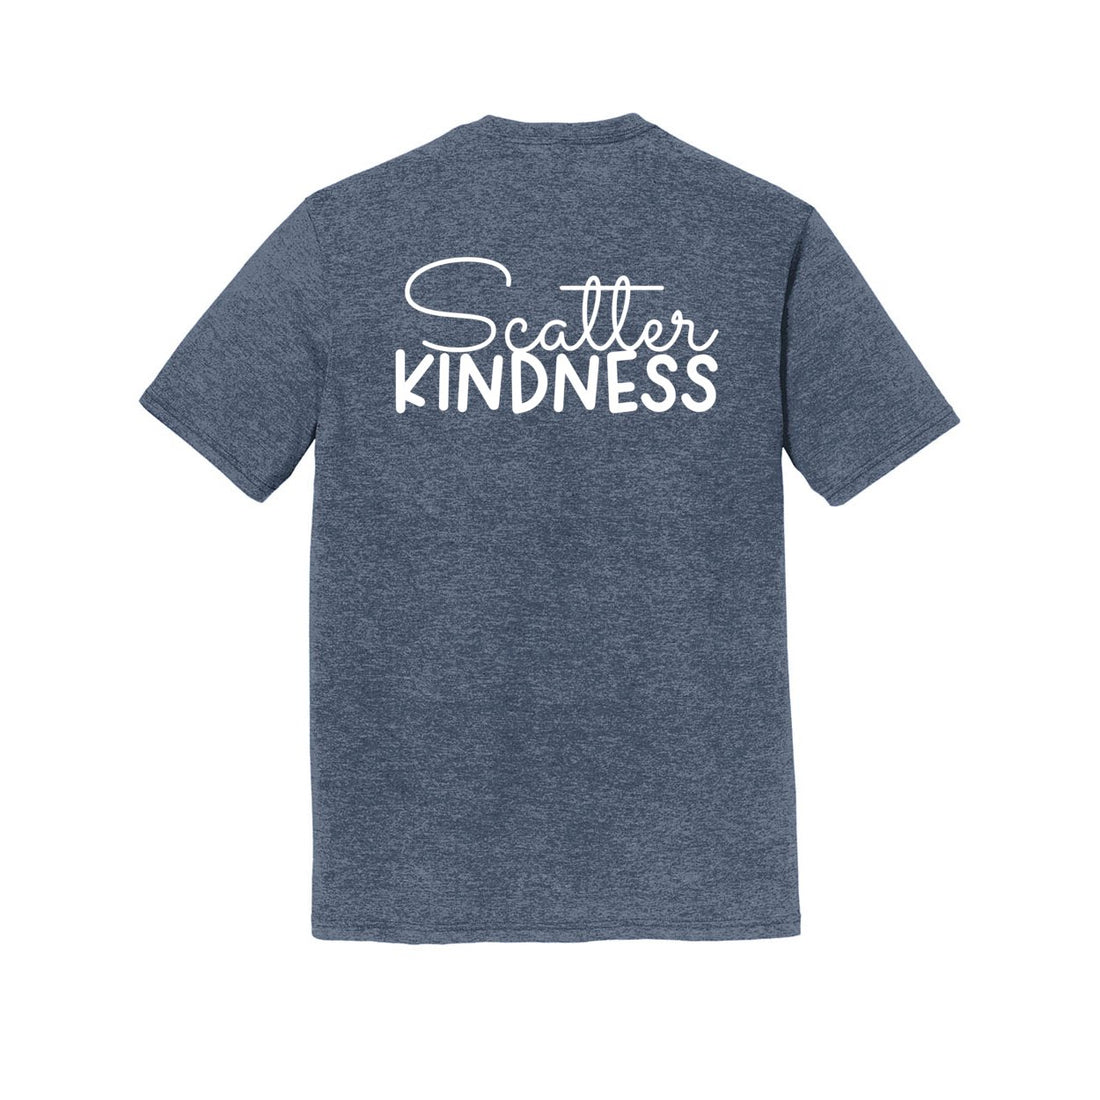 Scatter Kindness District Tee - T-Shirts - Positively Sassy - Scatter Kindness District Tee